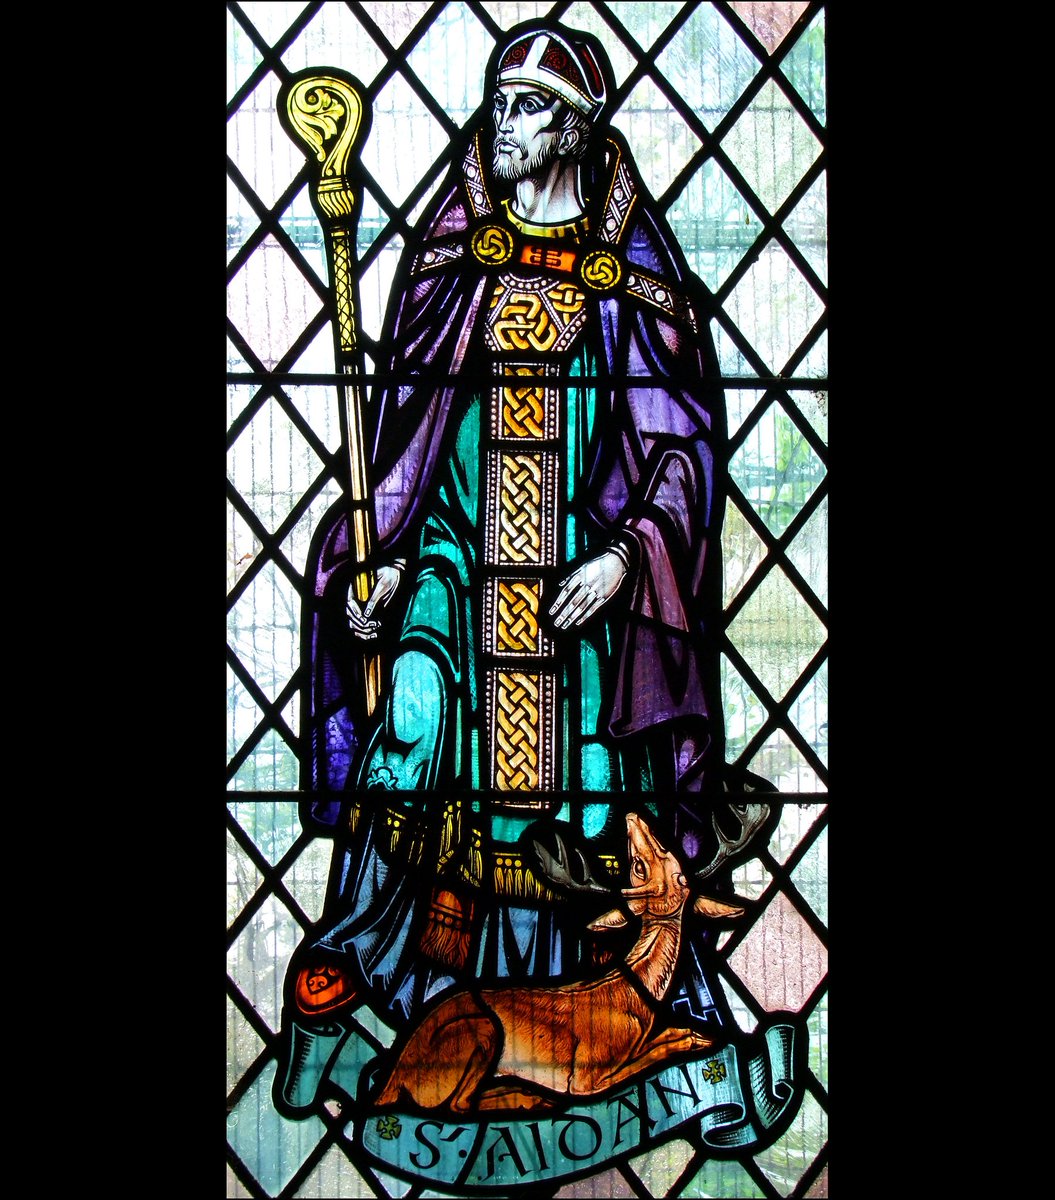 Today's the feast of St Aidan, founder of the monastic community at Lindisfarne and missionary to Northumbria. Here he is in 1960s glass by Rupert Moore at Kirby-le-Soken, Essex and King & Son at St Mark, Norwich.

Kirby: simonknott.co.uk/essexchurches/…
St Mark: norfolkchurches.co.uk/norwichmarklak…